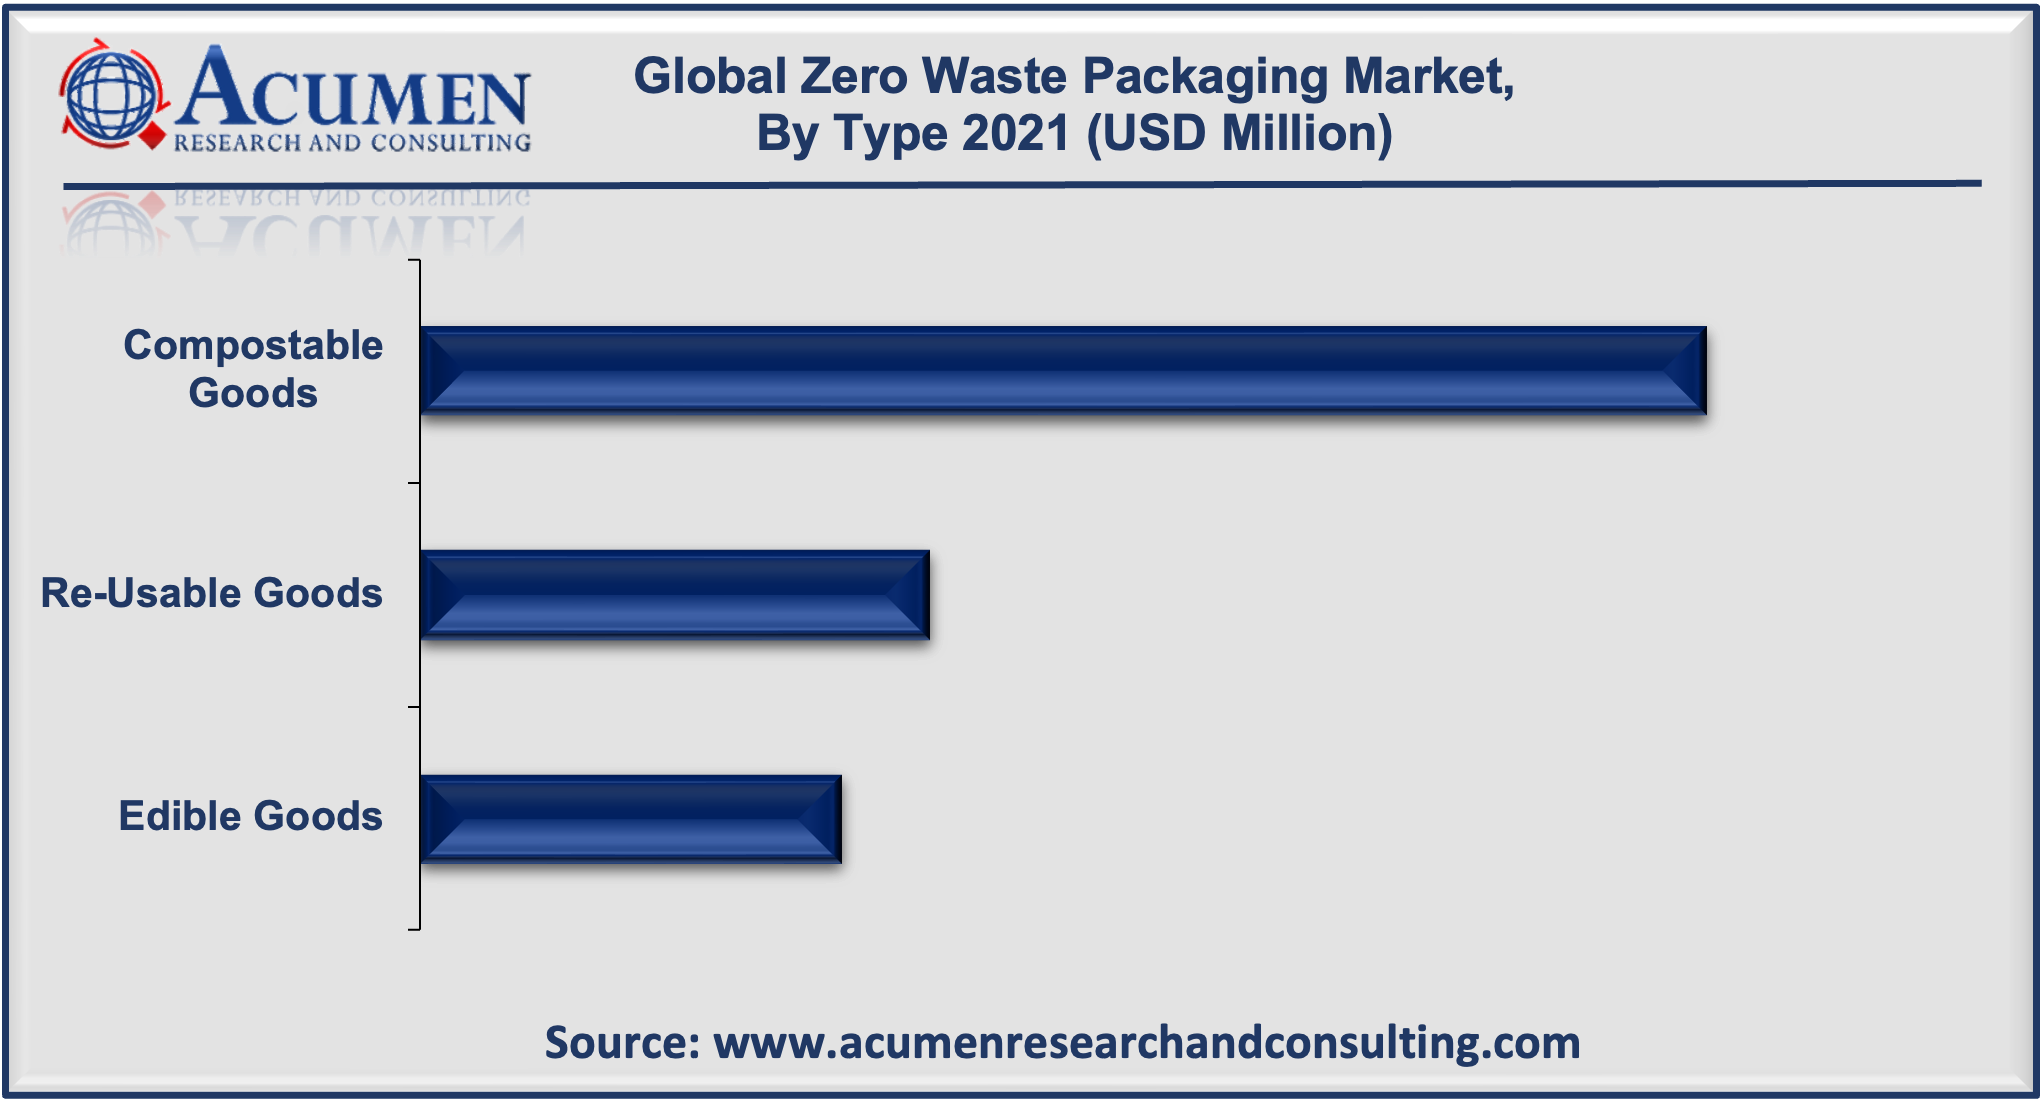 Zero Waste Packaging Market Size is estimated to reach USD 3,591 Mn by 2030, with a CAGR of 8.7% from 2022 to 2030.